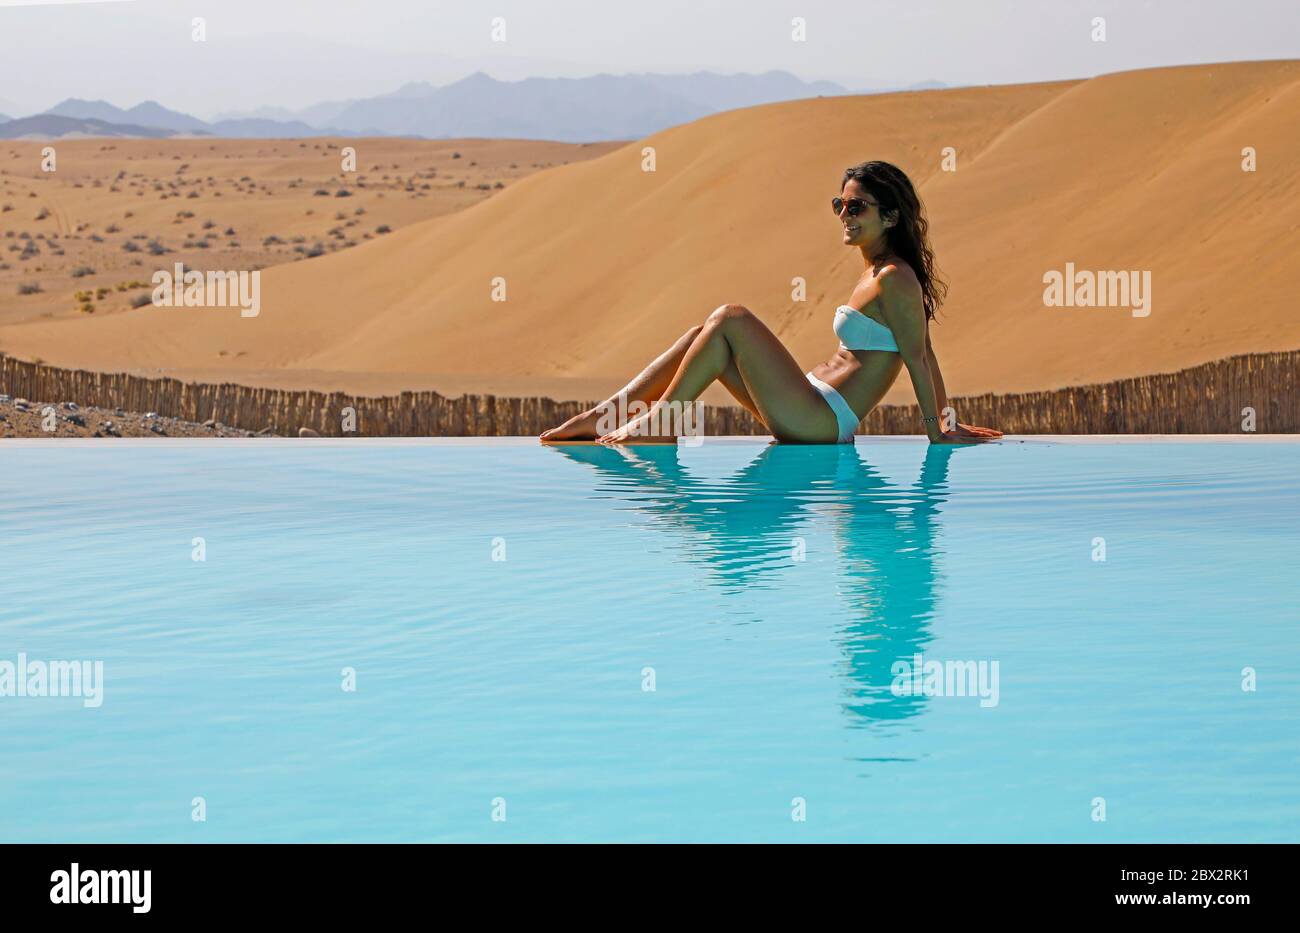 Oman sultanate, arabic peninsula, Dunes luxury tented hotel and resort located on sand dunes one hour from Mascate and airport, local beauty in swimming dress by the swimming pool Stock Photo